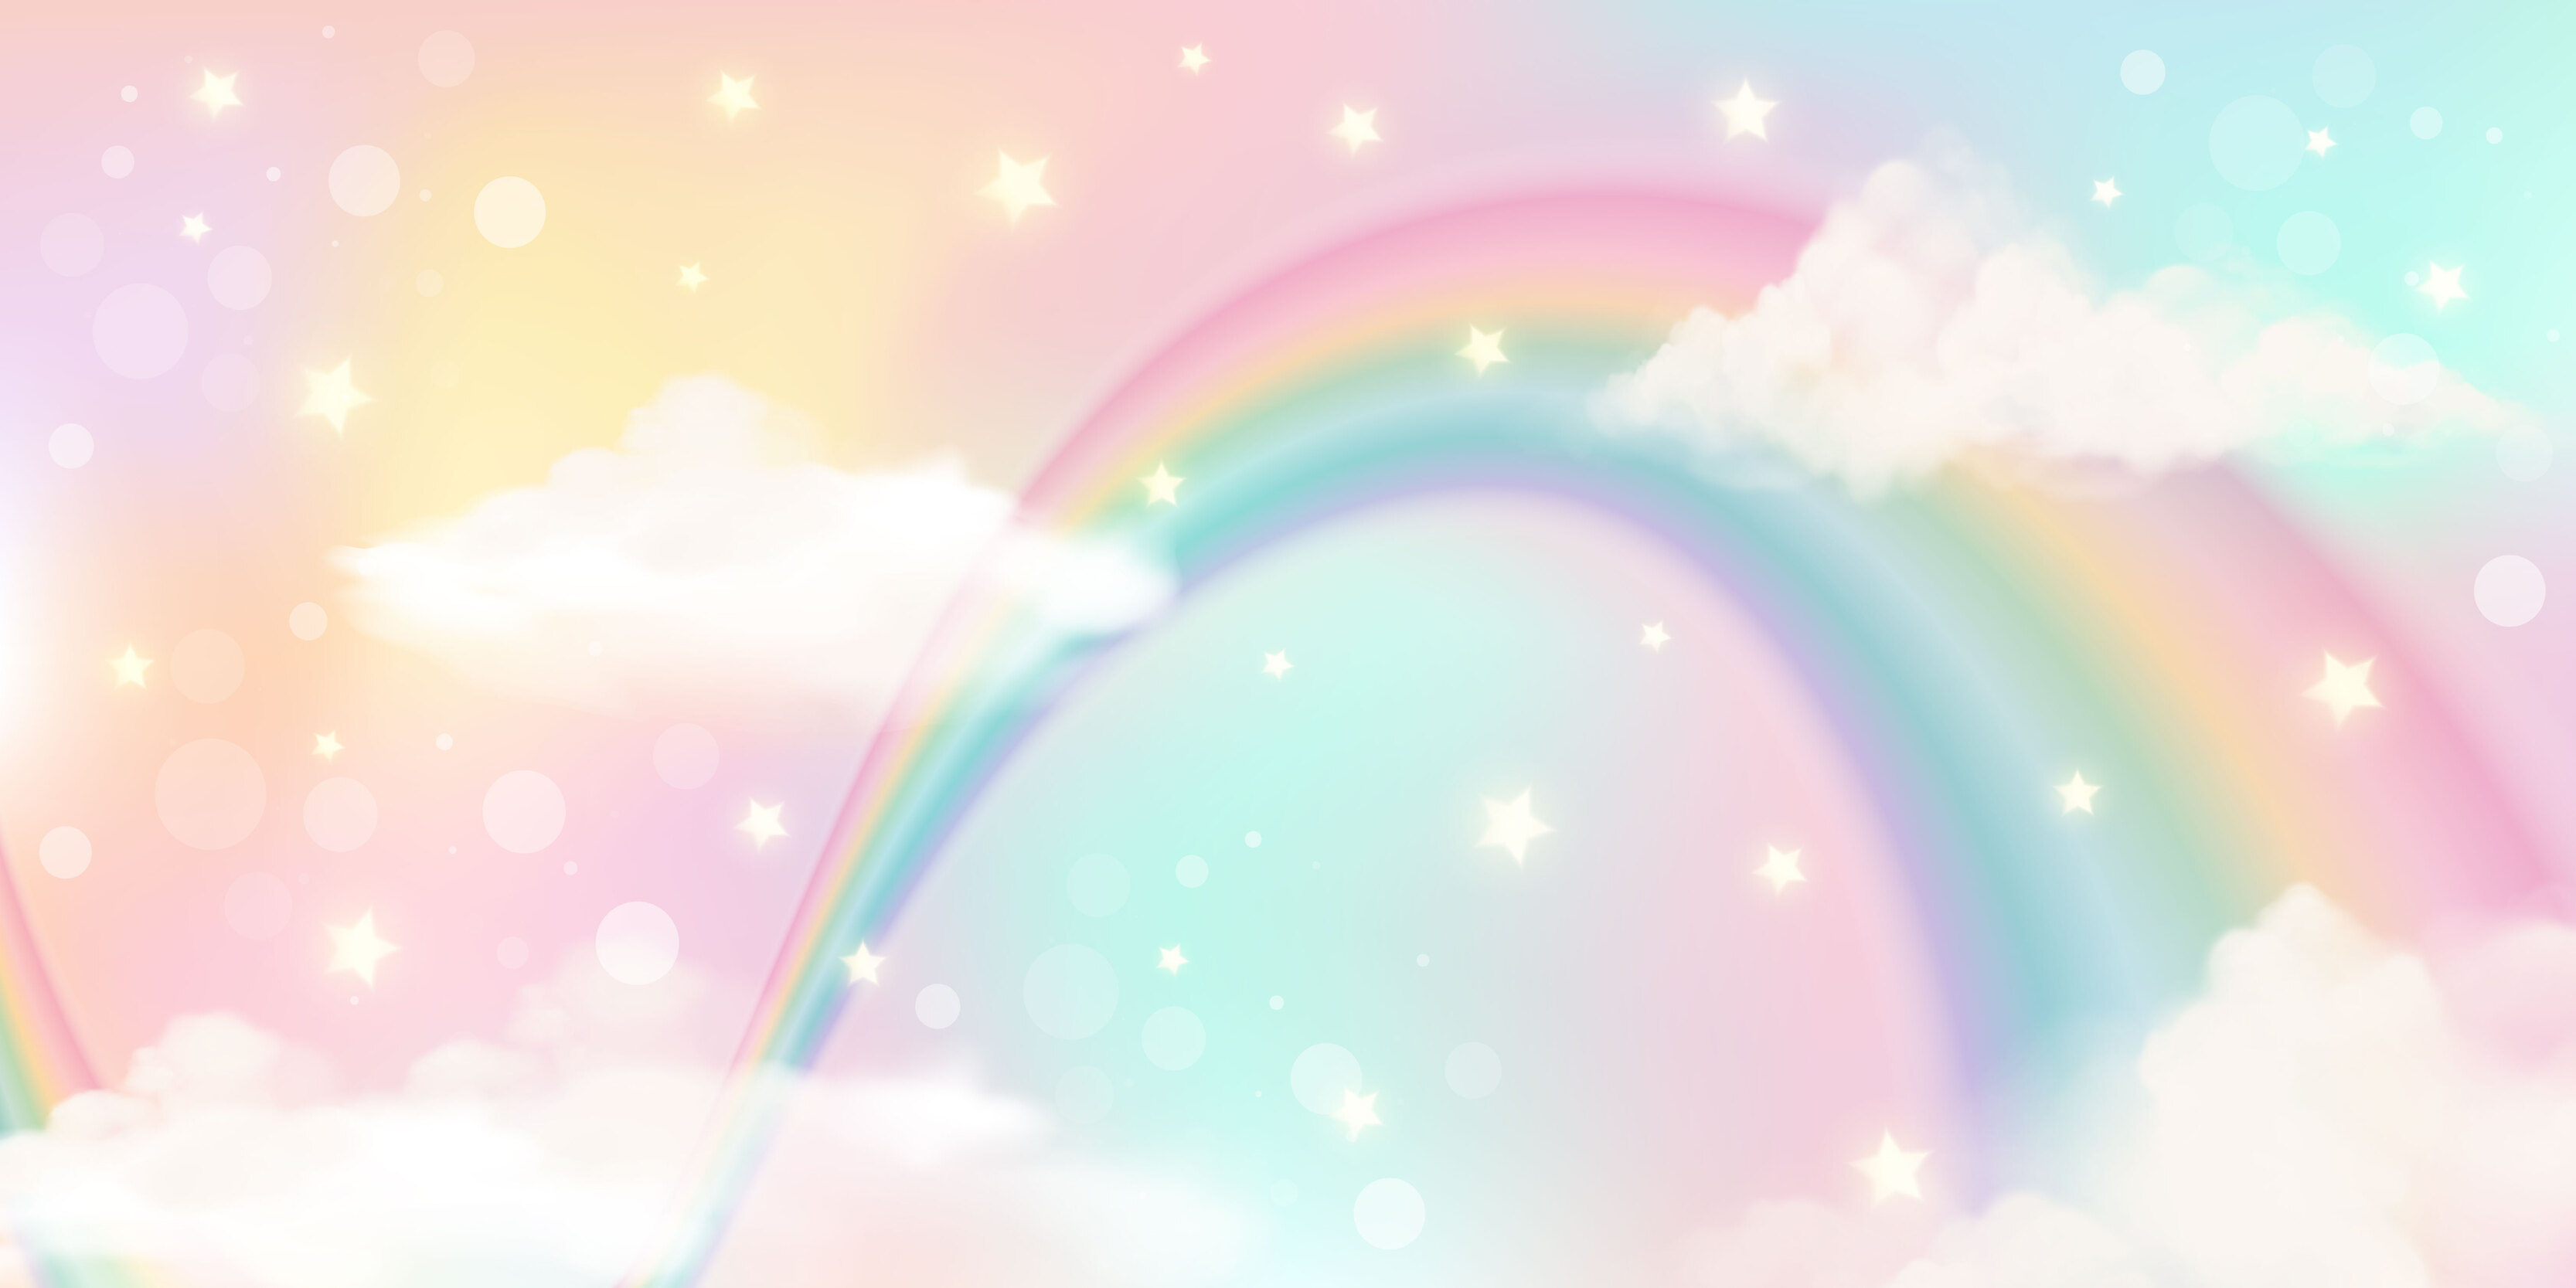 3333x1667 Holographic fantasy rainbow unicorn background with clouds. Pastel color sky. Magical landscape, abstract fabulous pattern. Cute candy wallpaper. Vector. 5142687 Vector Art